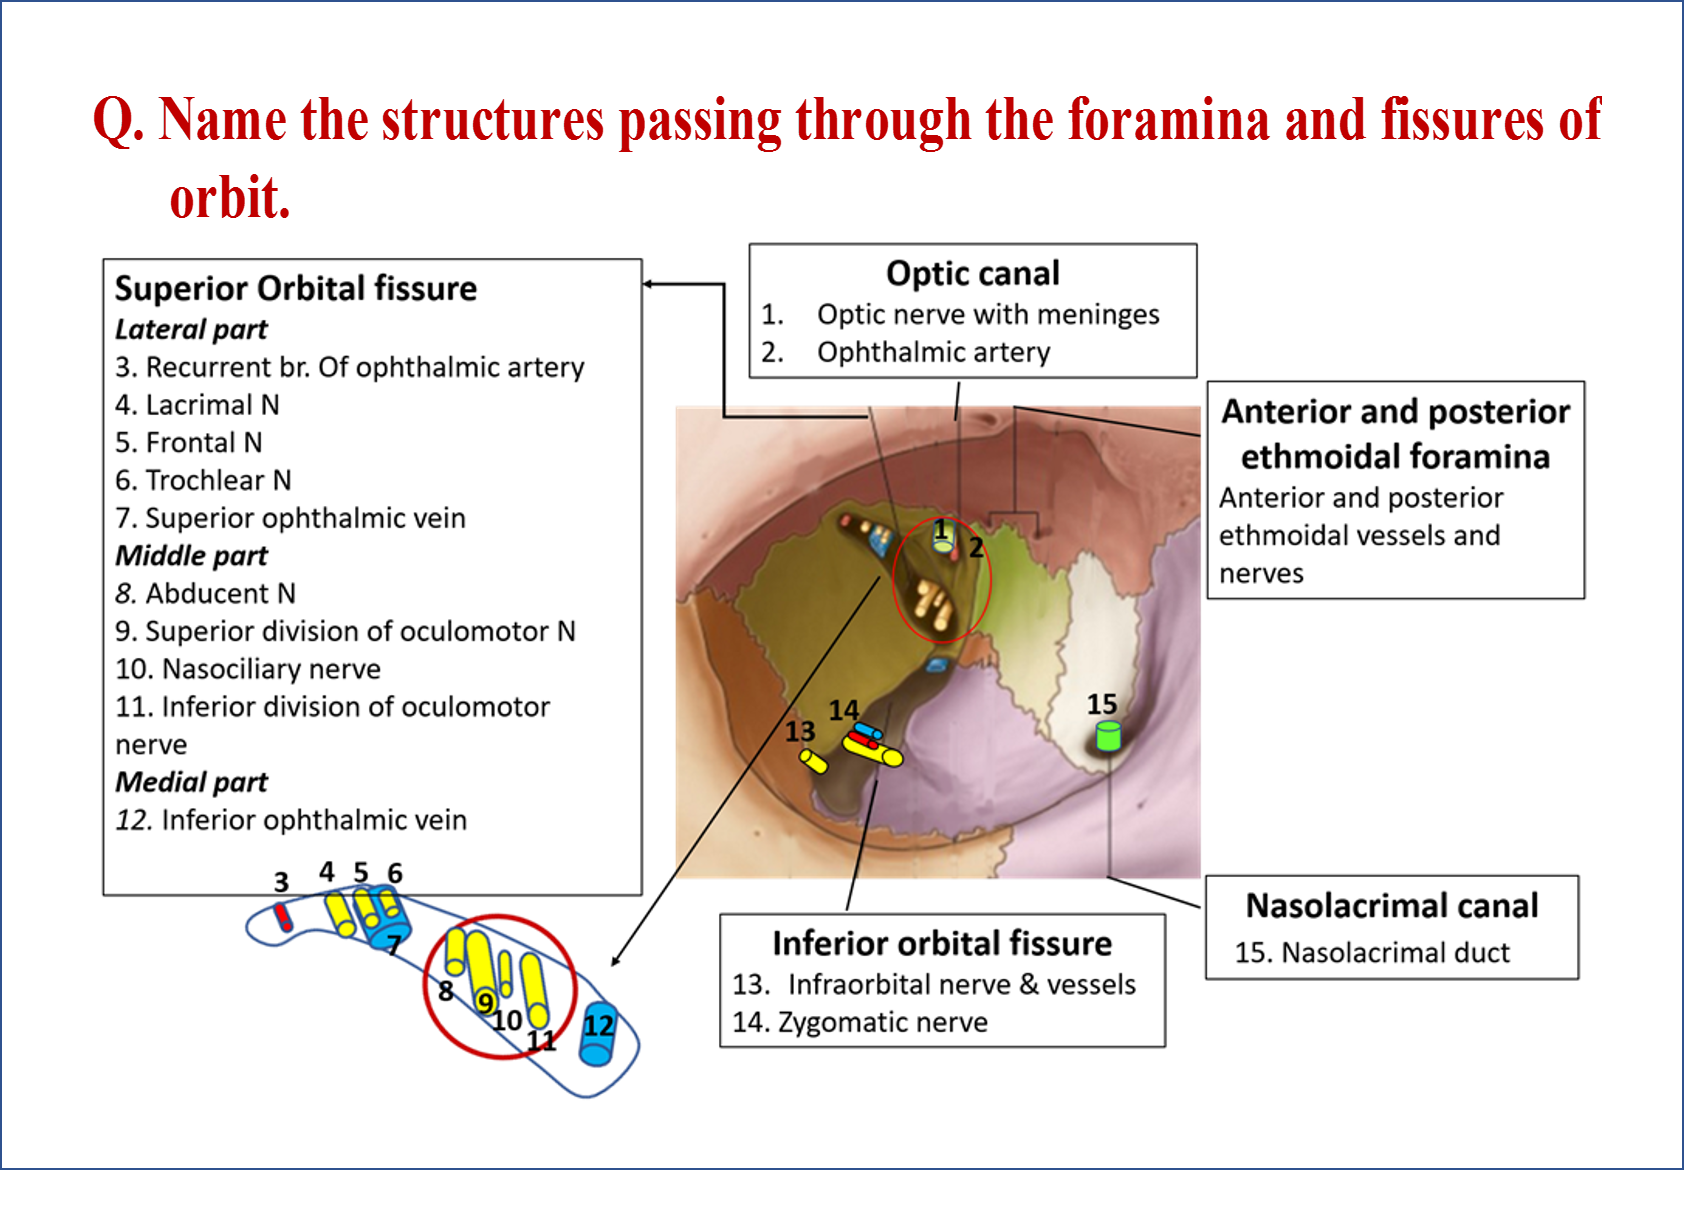 Structures passing through superior and inferior orbital fissure and optic canal